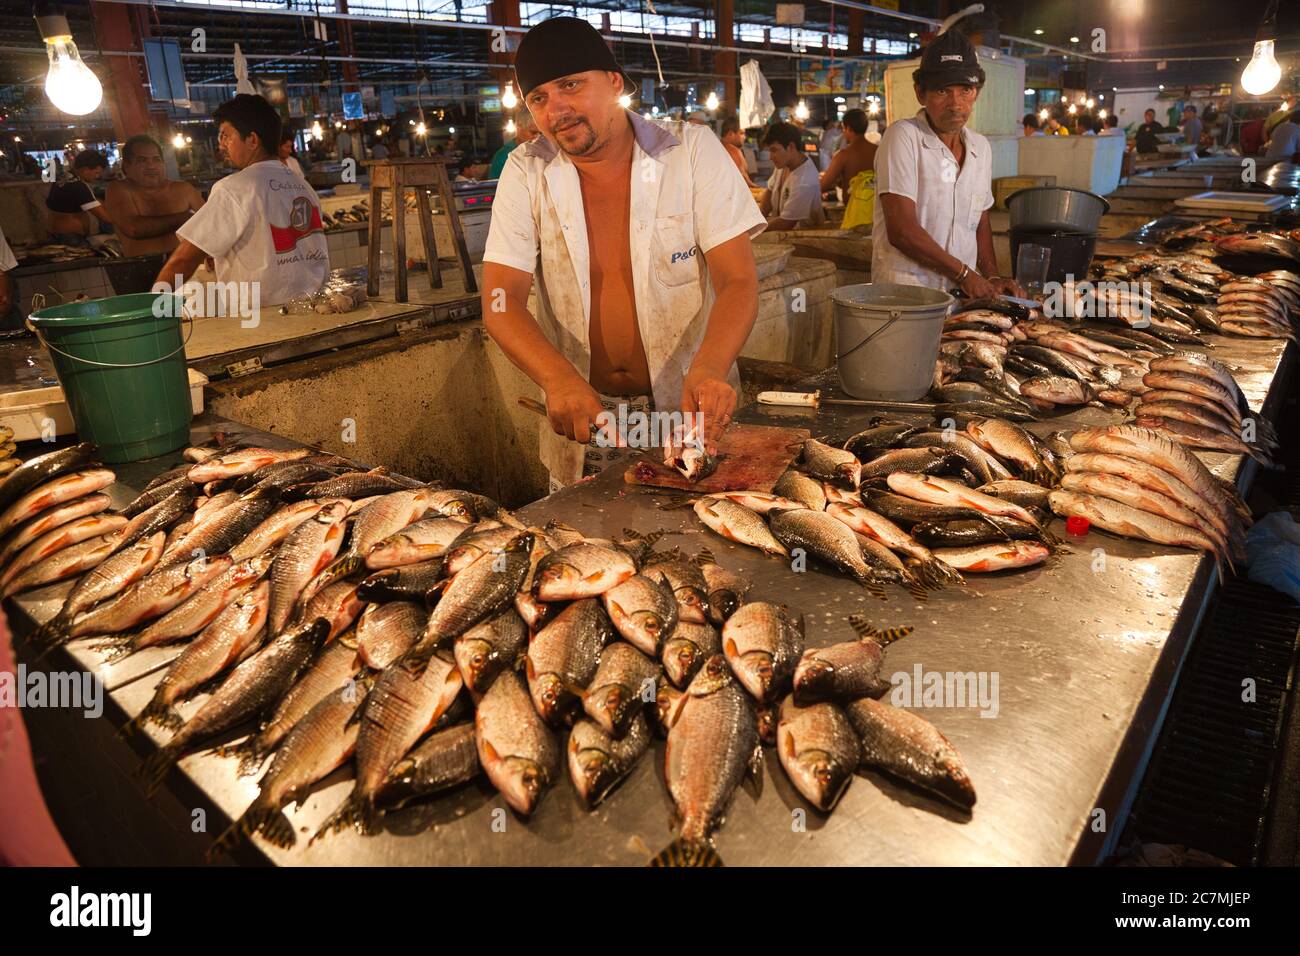 Man at his fish stall at the Fish Market with display of locally caught fish all around, in Manaus, Amazonas State, Brazil Stock Photo